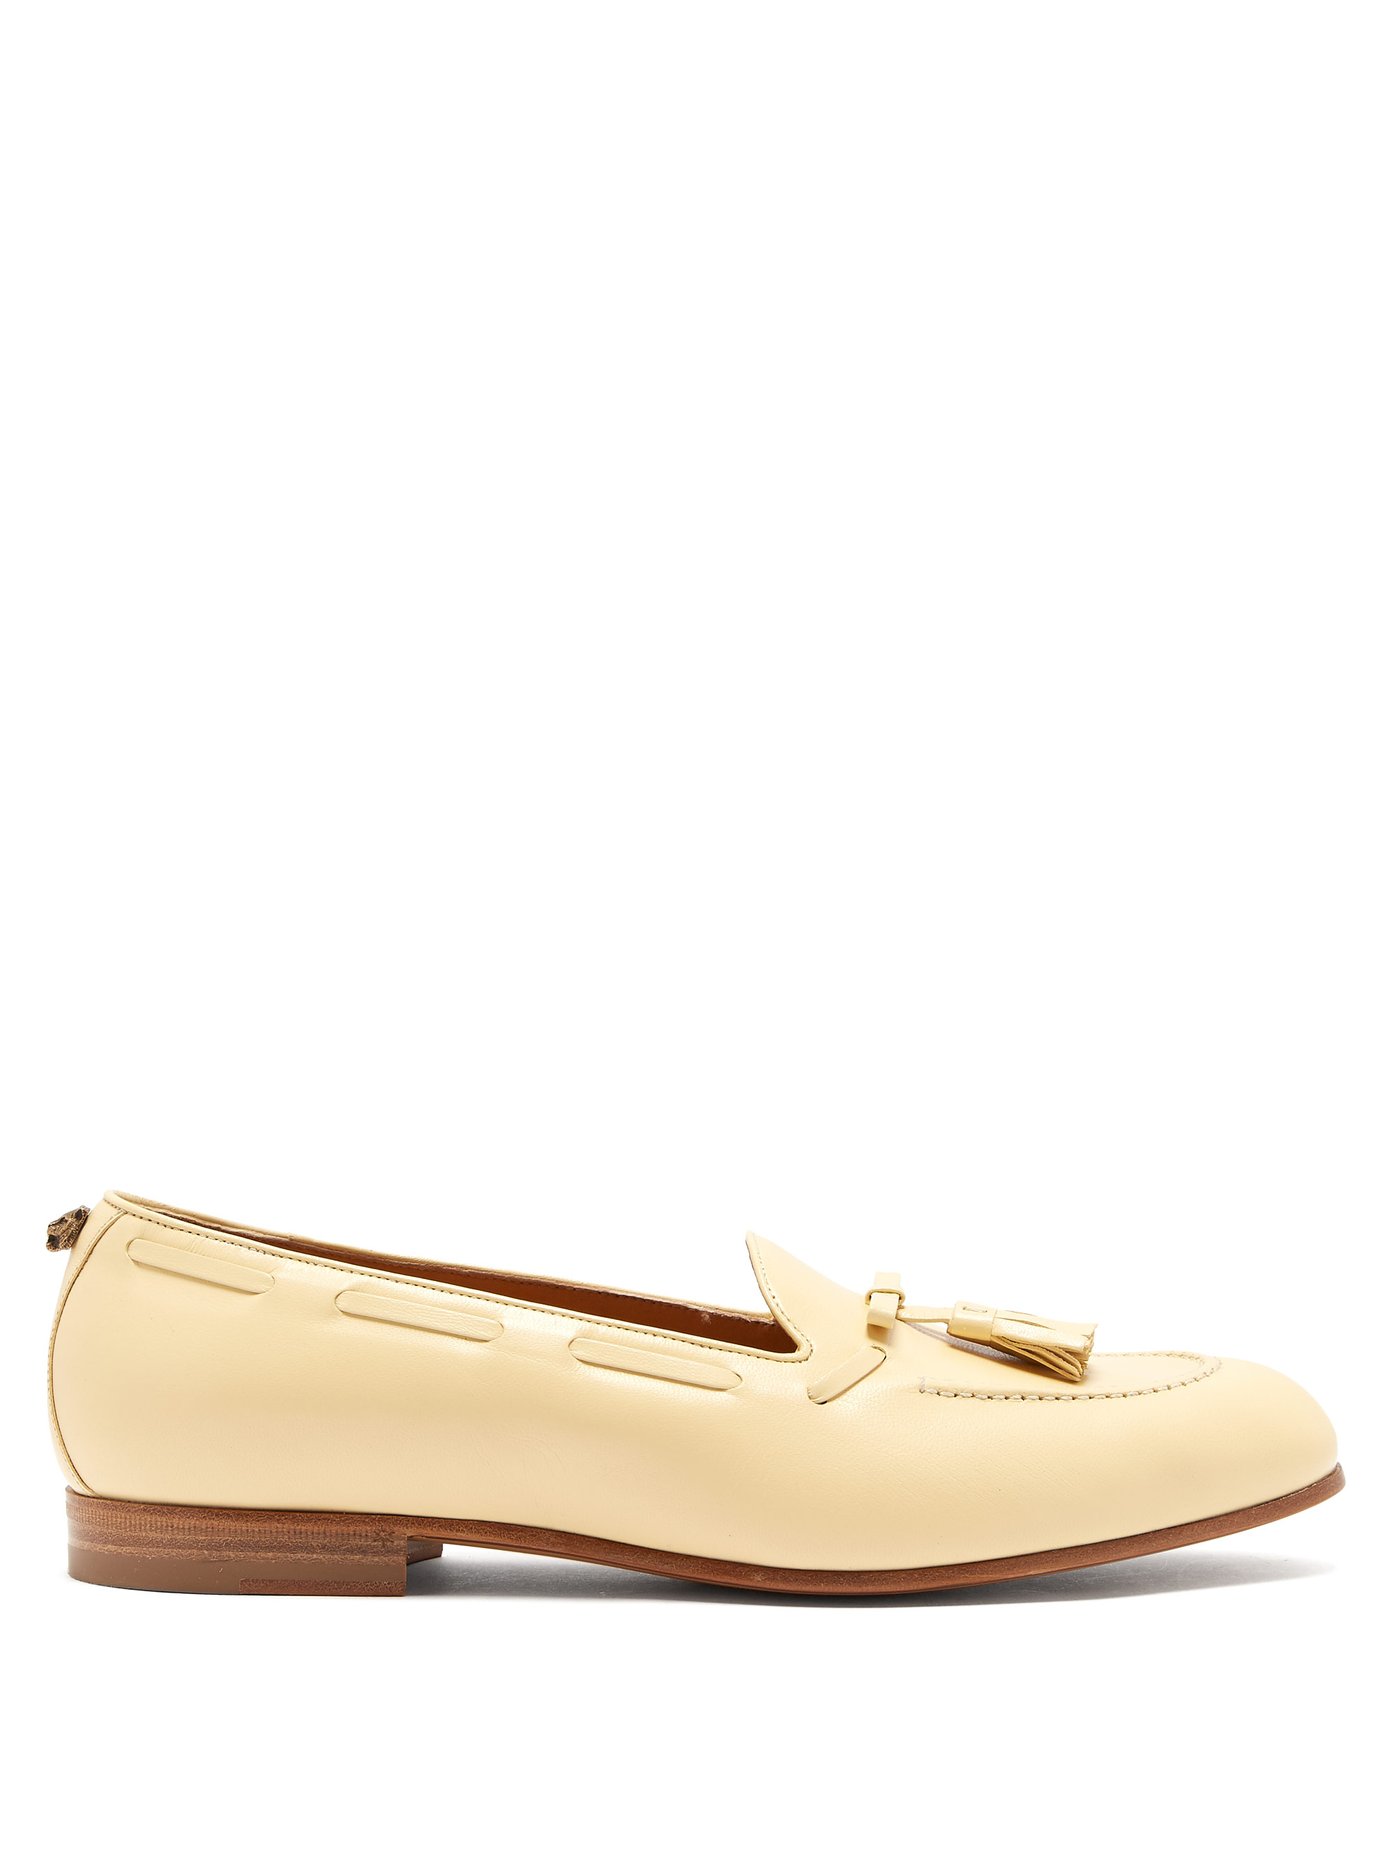 Quentin tassel leather loafers | Gucci 